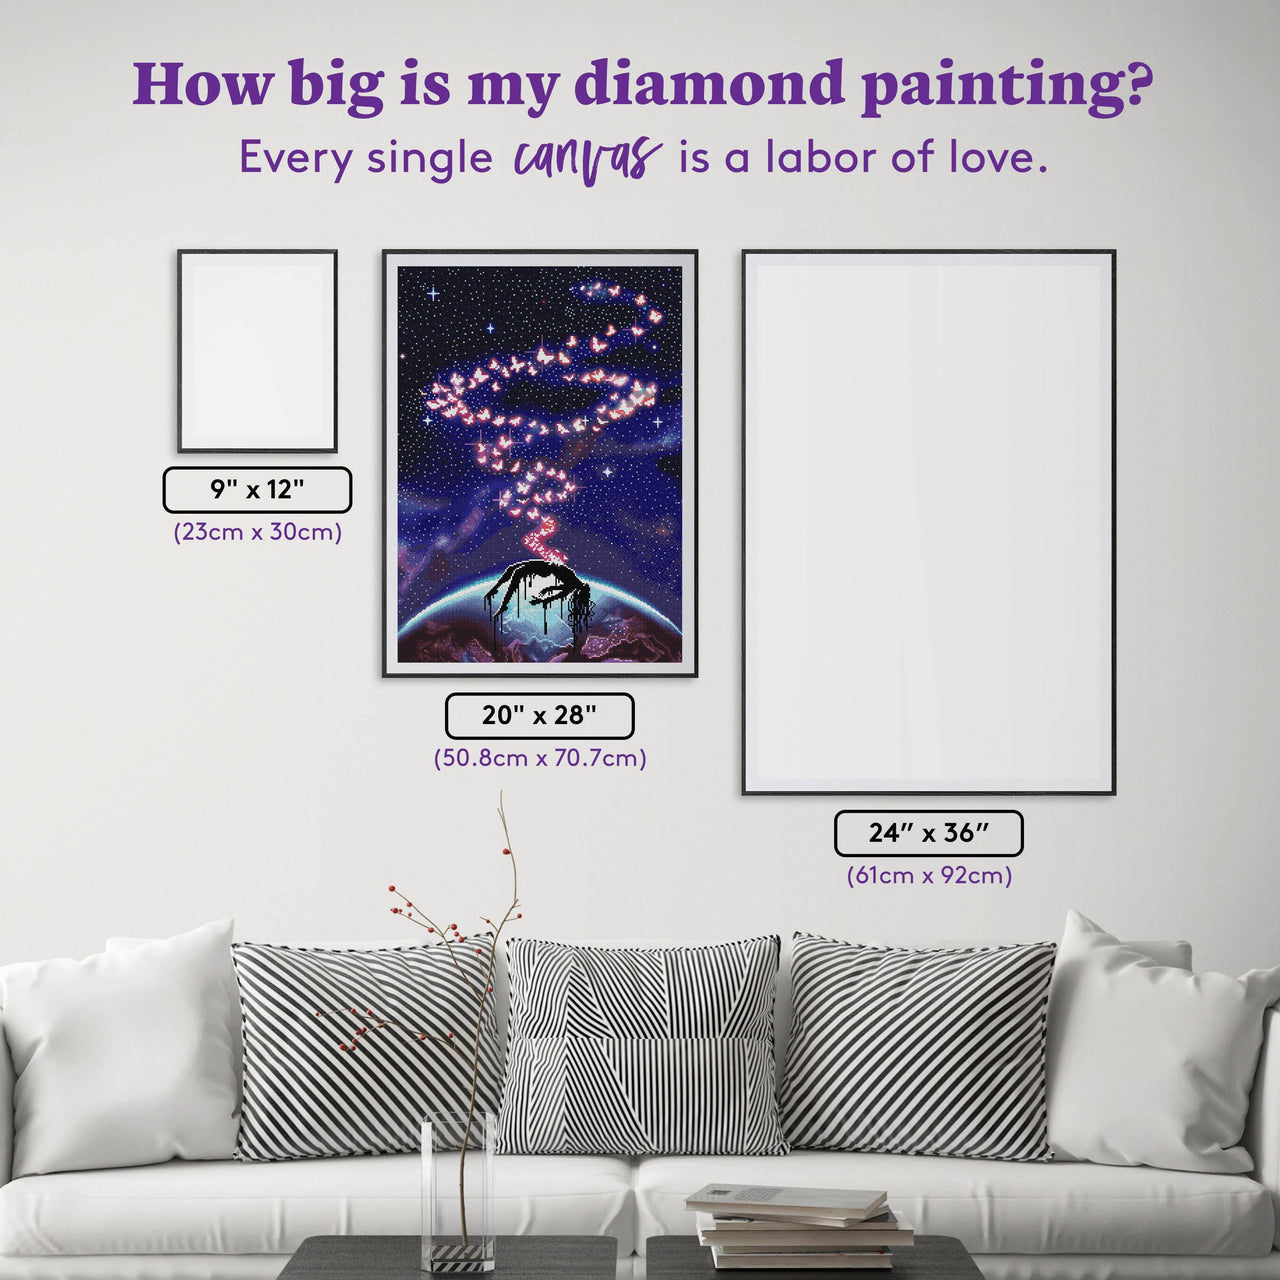 Diamond Painting Butterfly Sin 20" x 28" (50.8cm x 70.7cm) / Round With 46 Colors Including 2 ABs and 1 Iridescent Diamonds and 1 Fairy Dust Diamonds / 57,936